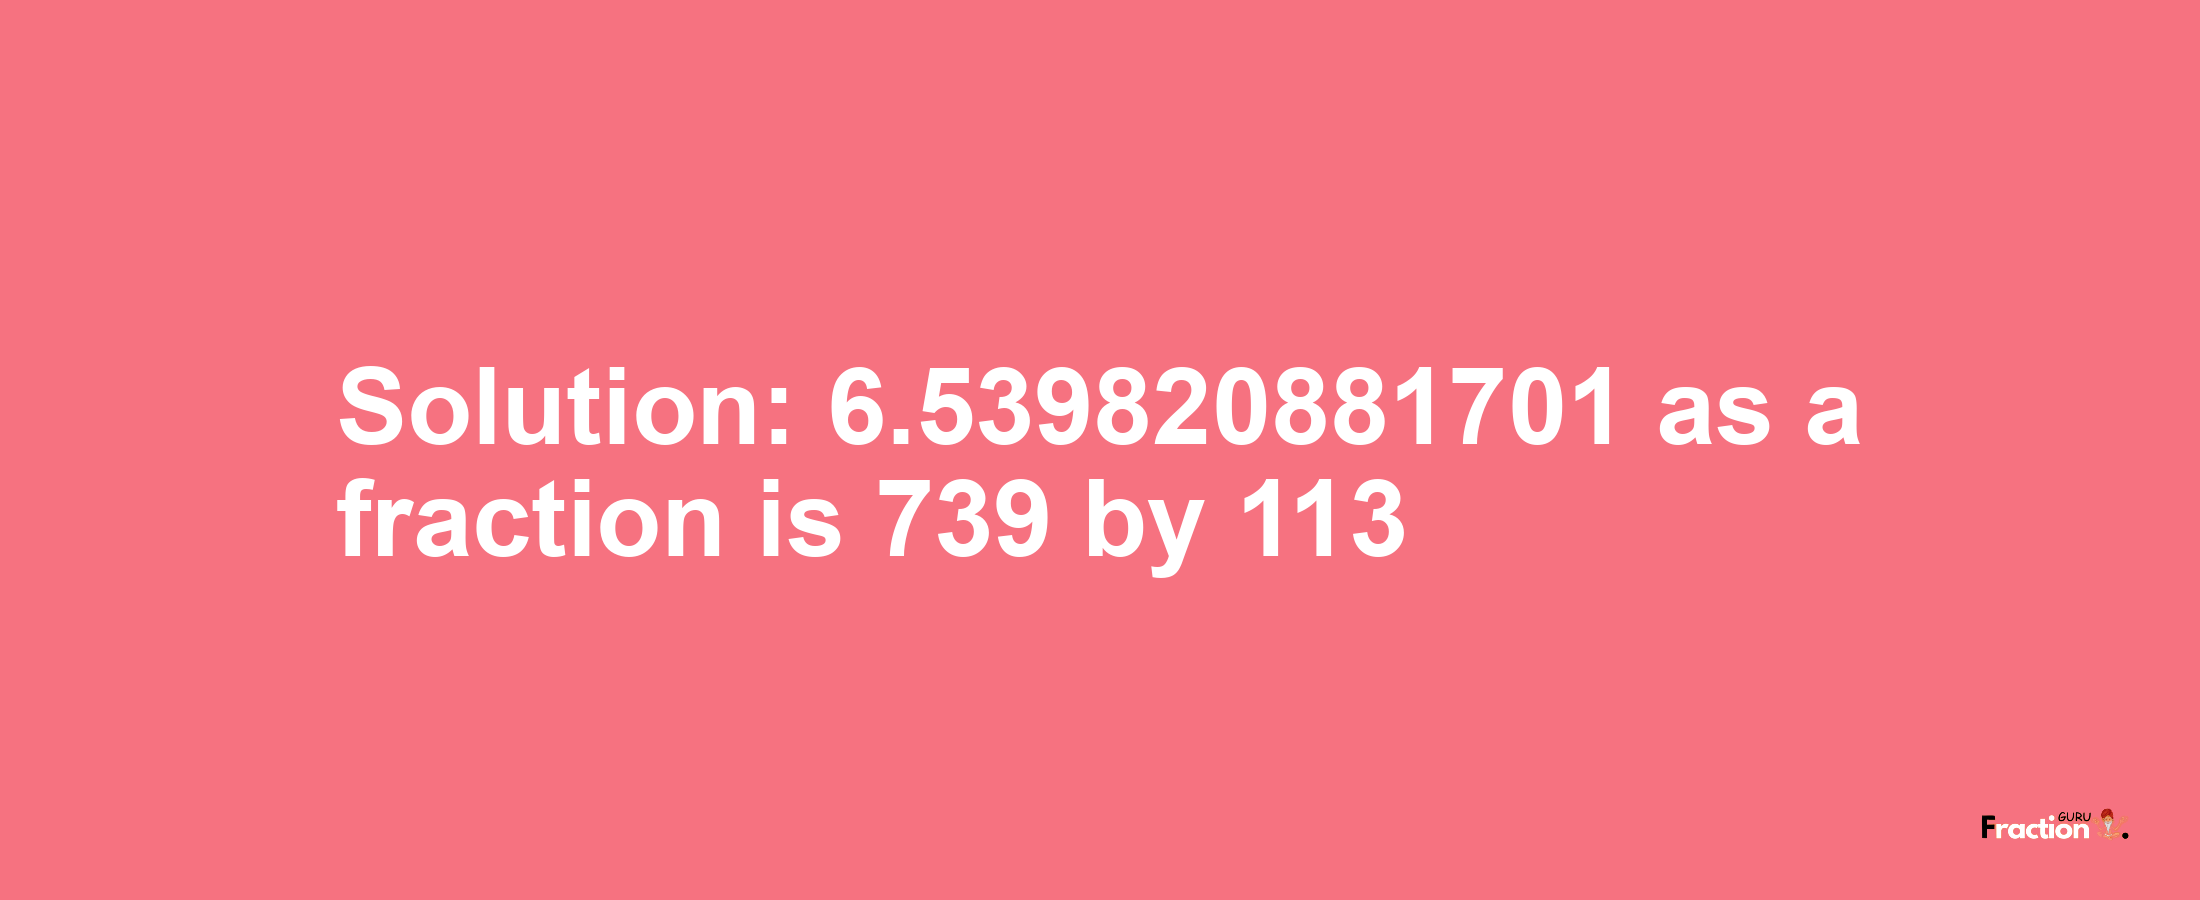 Solution:6.539820881701 as a fraction is 739/113